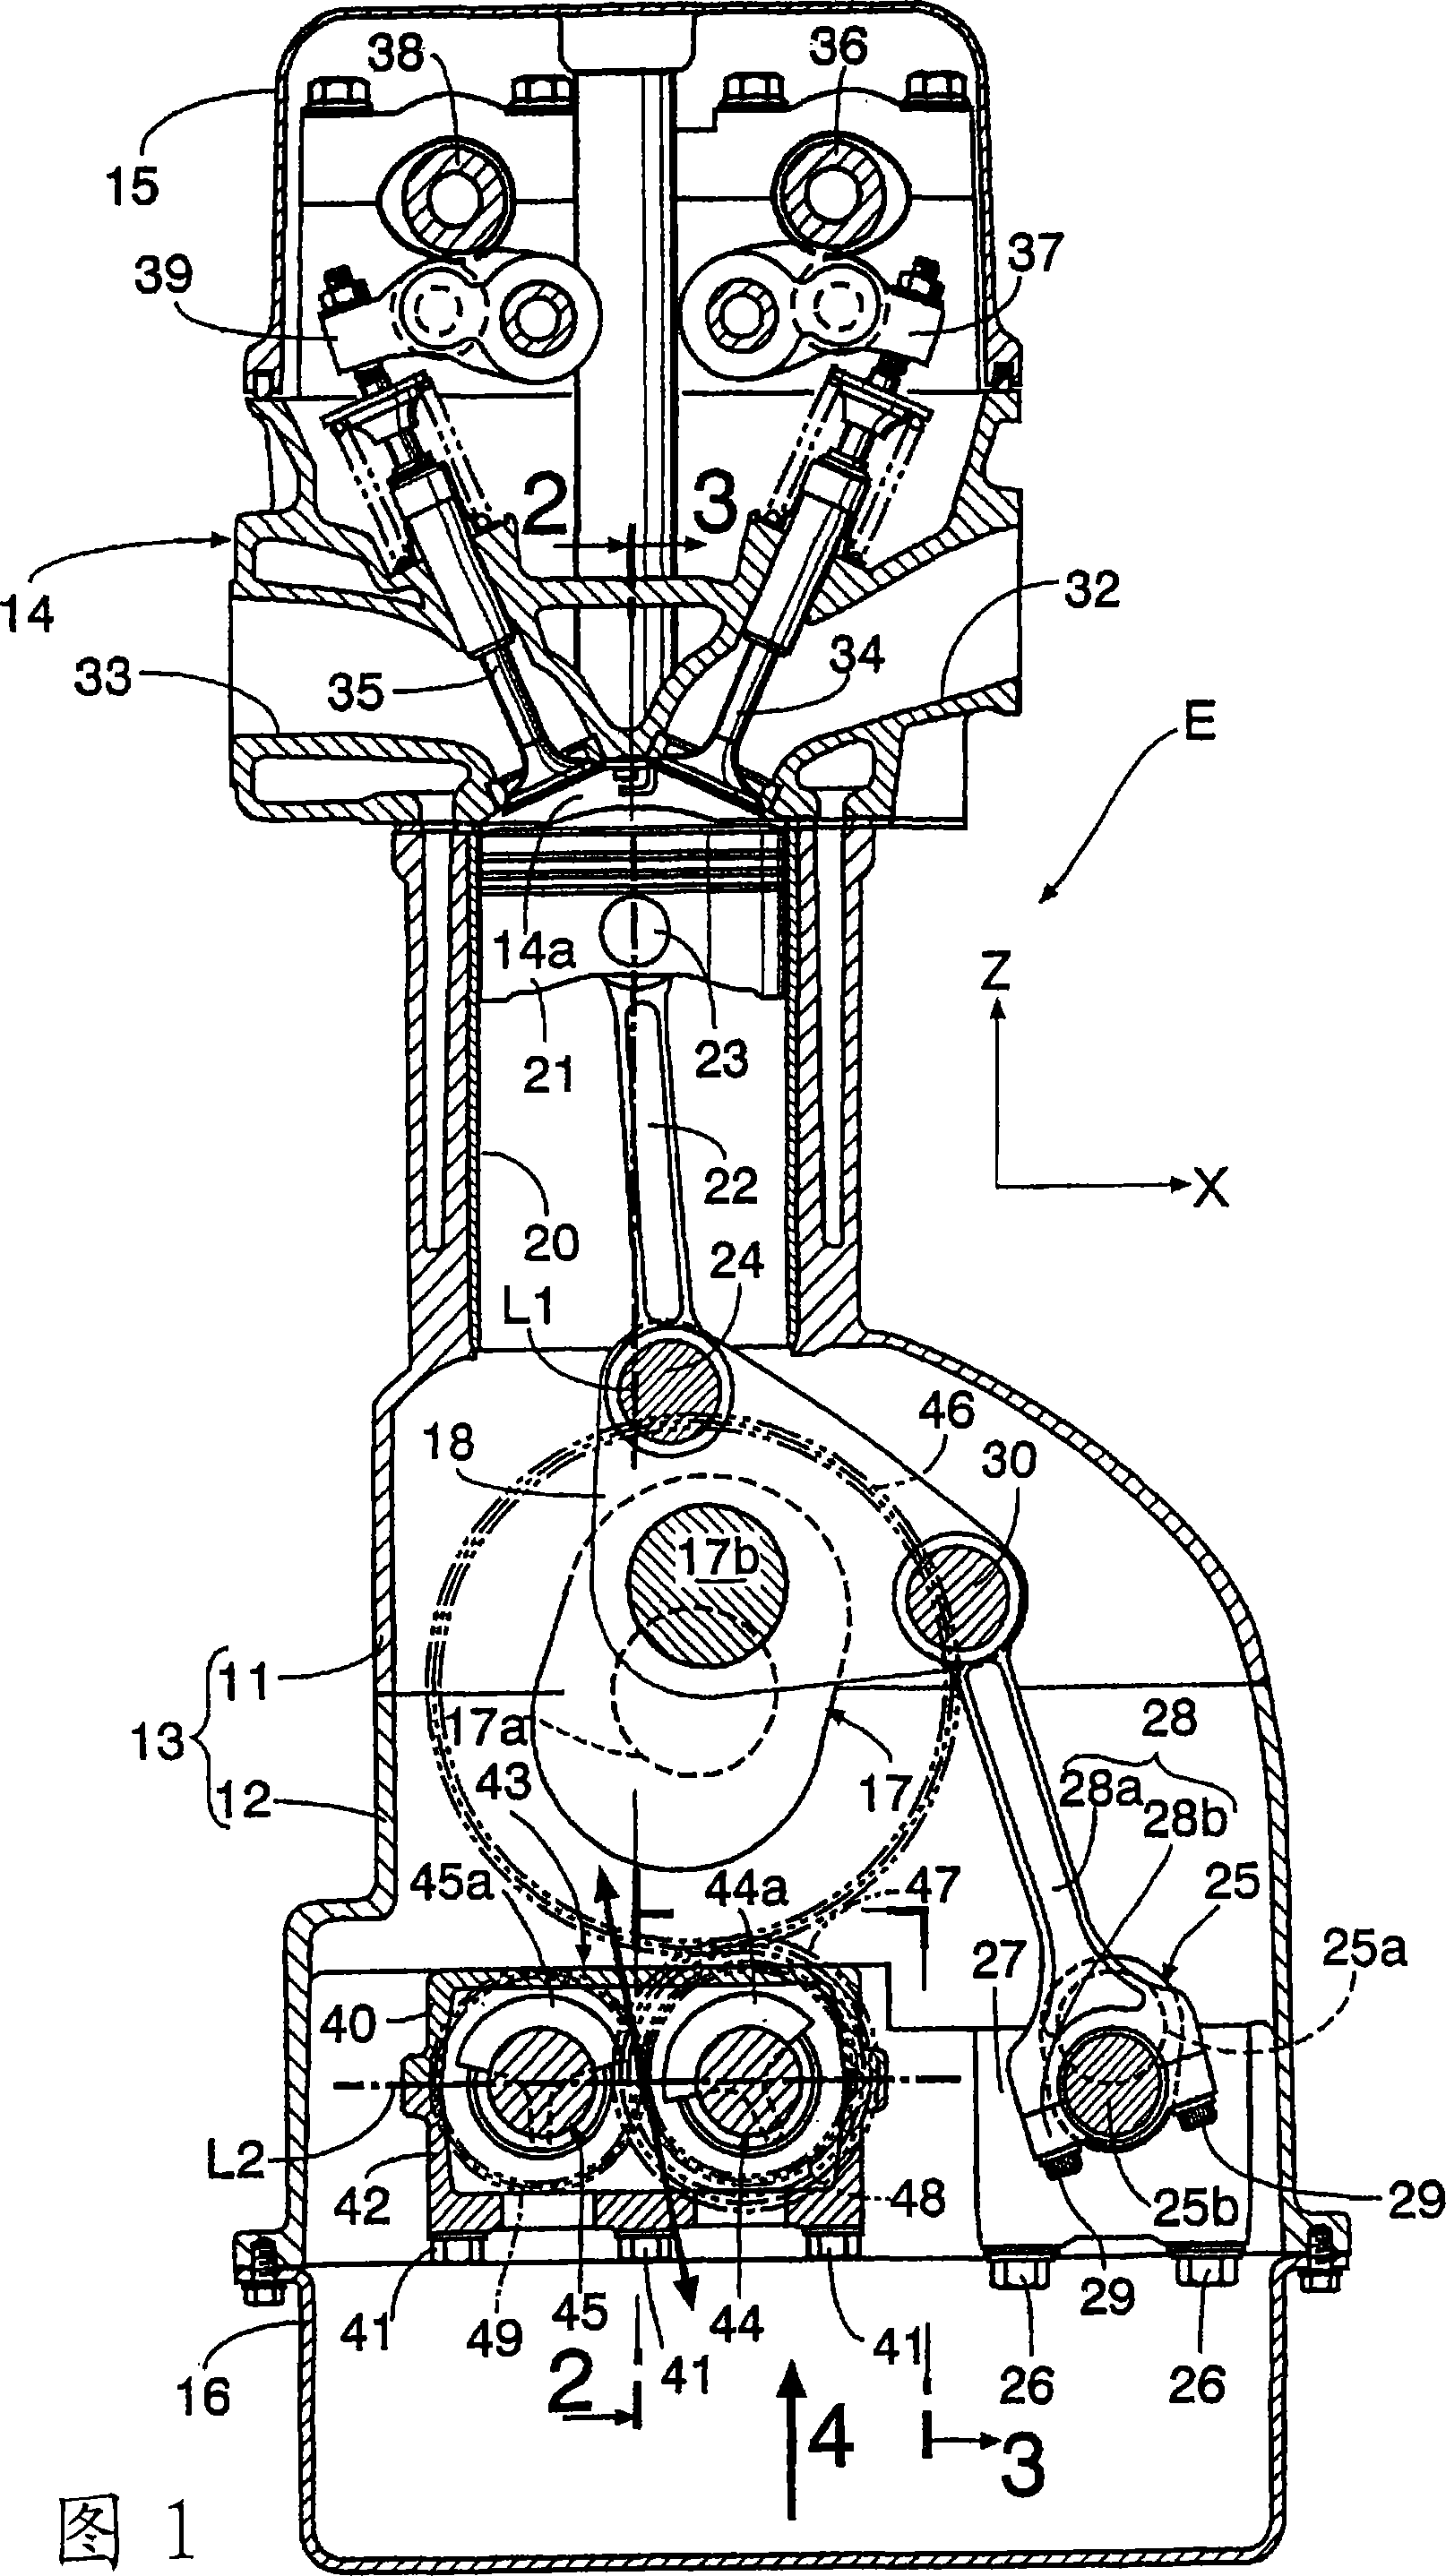 Device for removing engine vibration and engine whose stroke characteriscts are variable